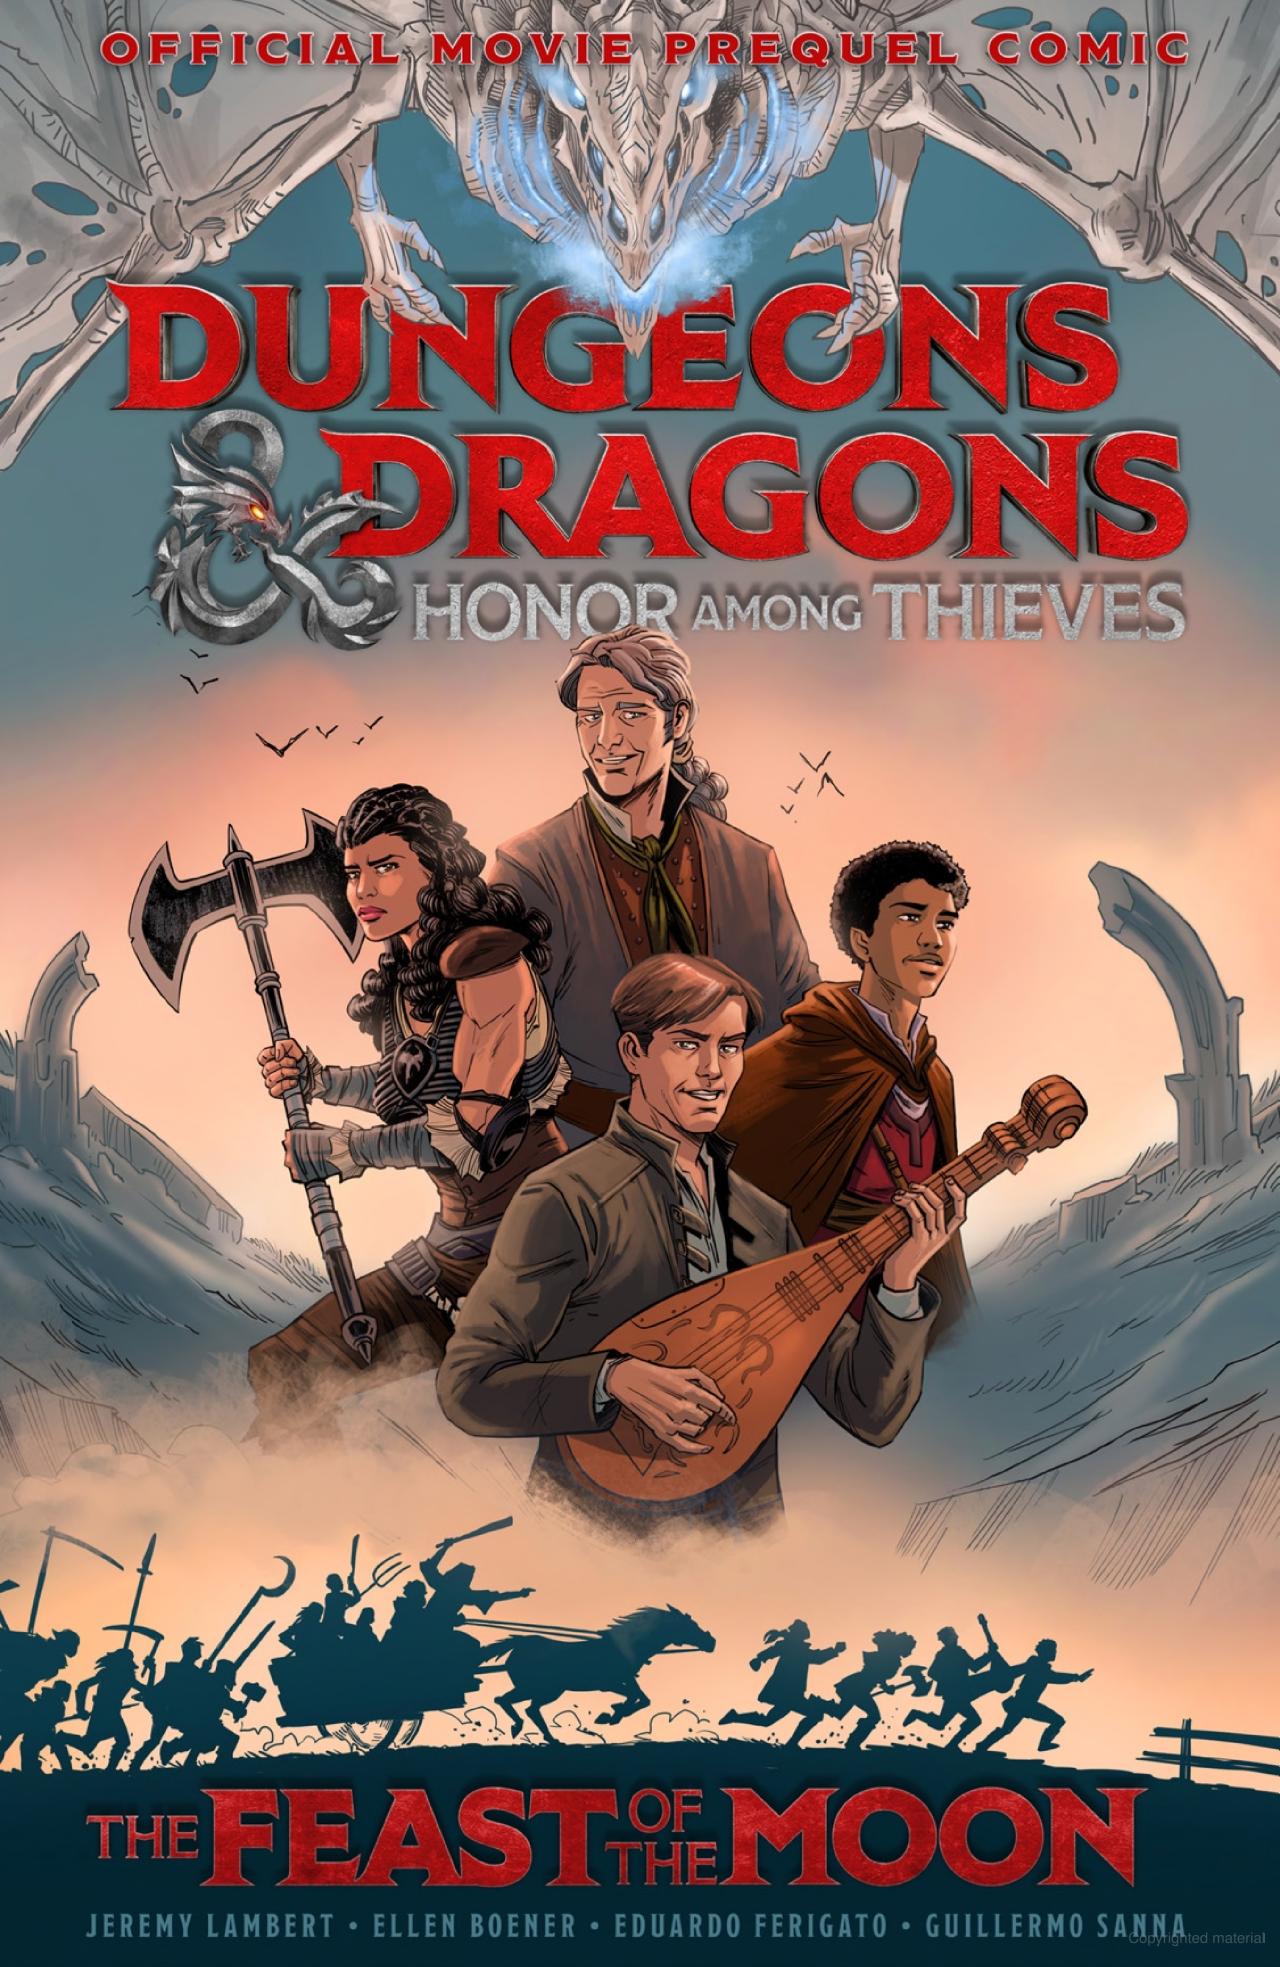 A picture of the comic book cover with the title text. Center is a tableau of 4 main characters (Edgin, Holga, Forge, and Simon). A dracolich looms overhead. Under the tableau, we see a silhouette of the heroes fleeing an angry mob.